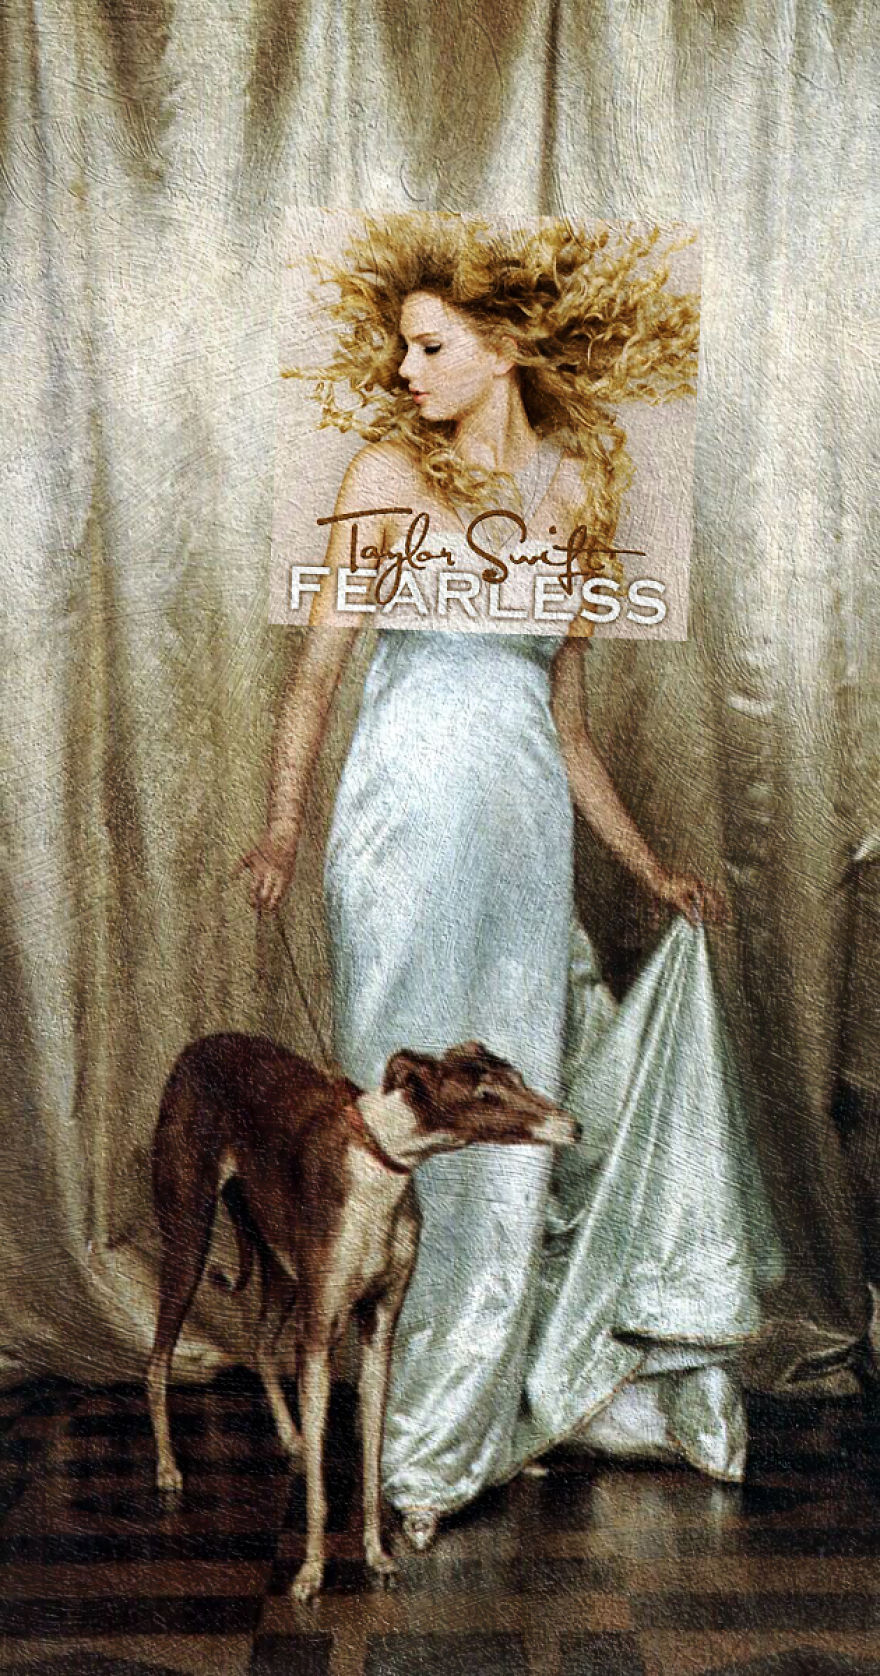 Fearless By Taylor Swift + Good Companions By Vittorio Reggianini